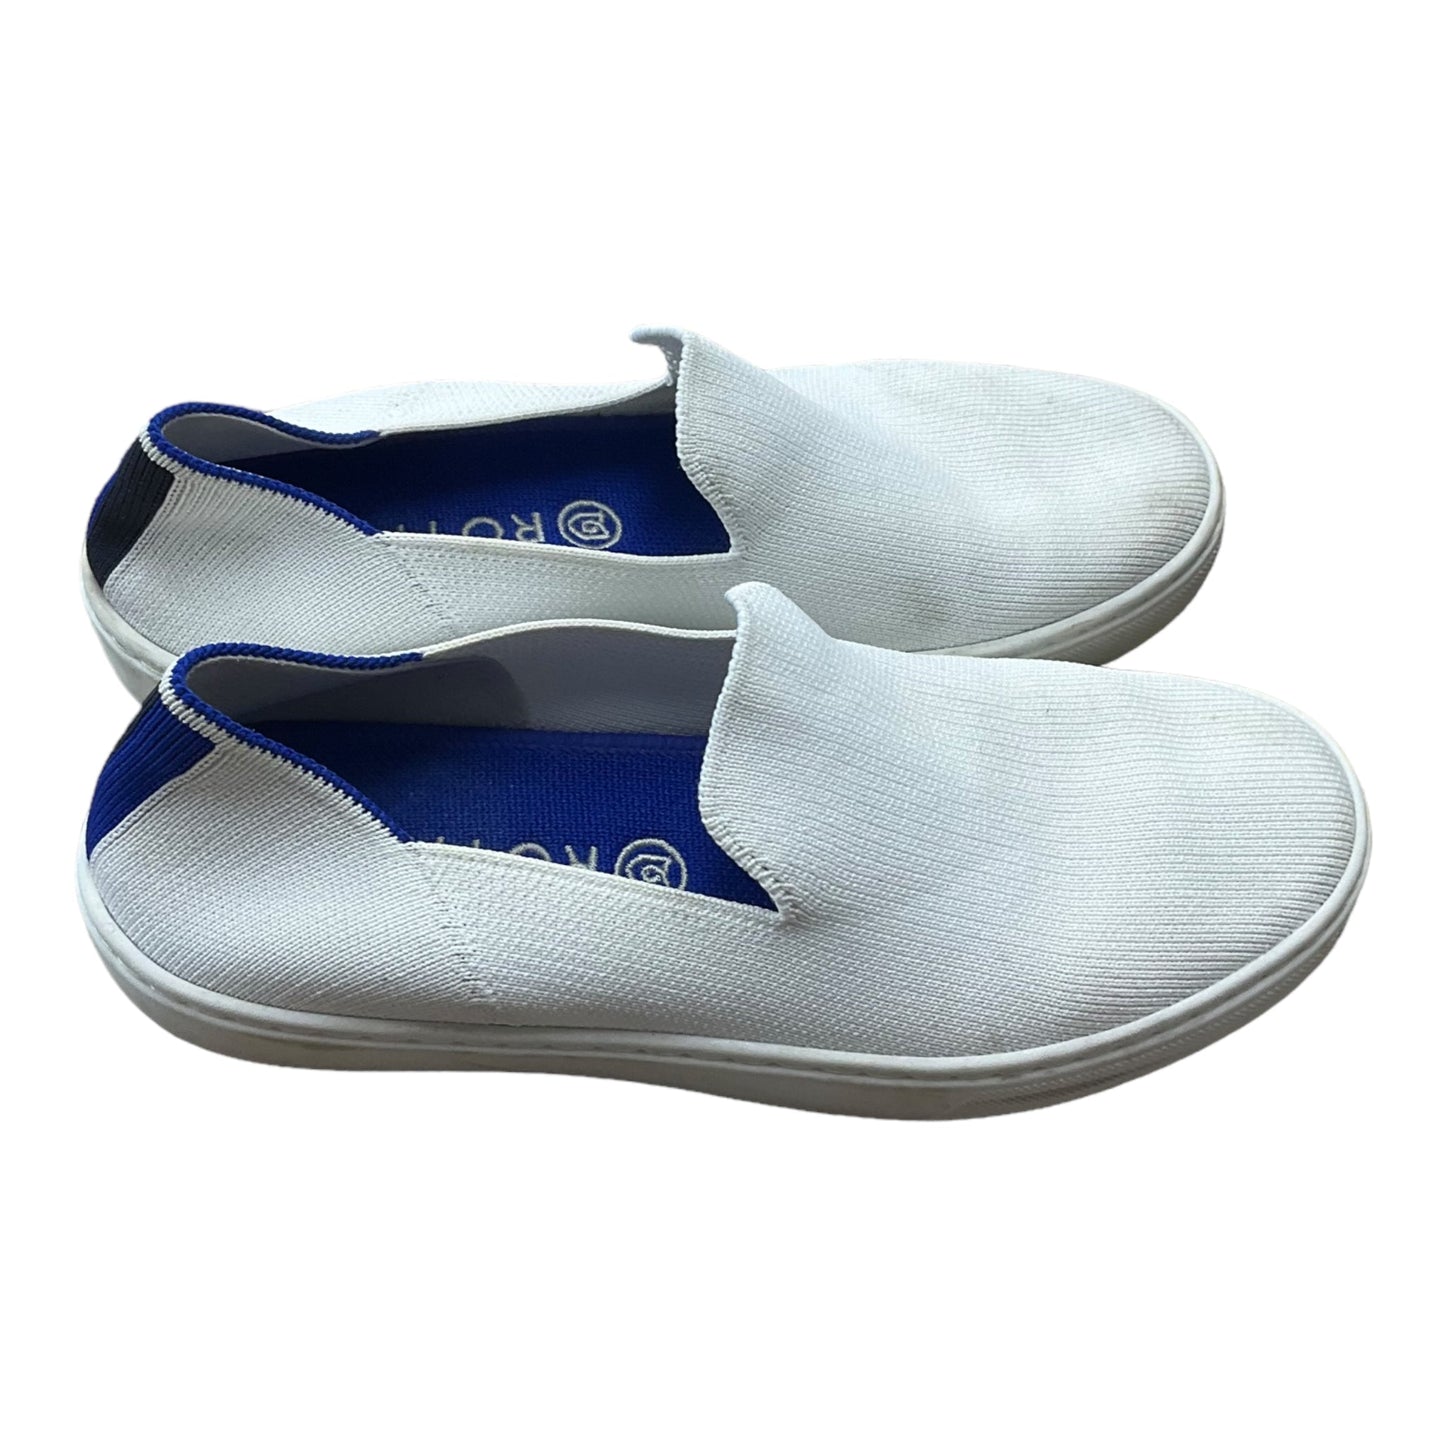 Shoes Flats Boat By Rothys  Size: 6